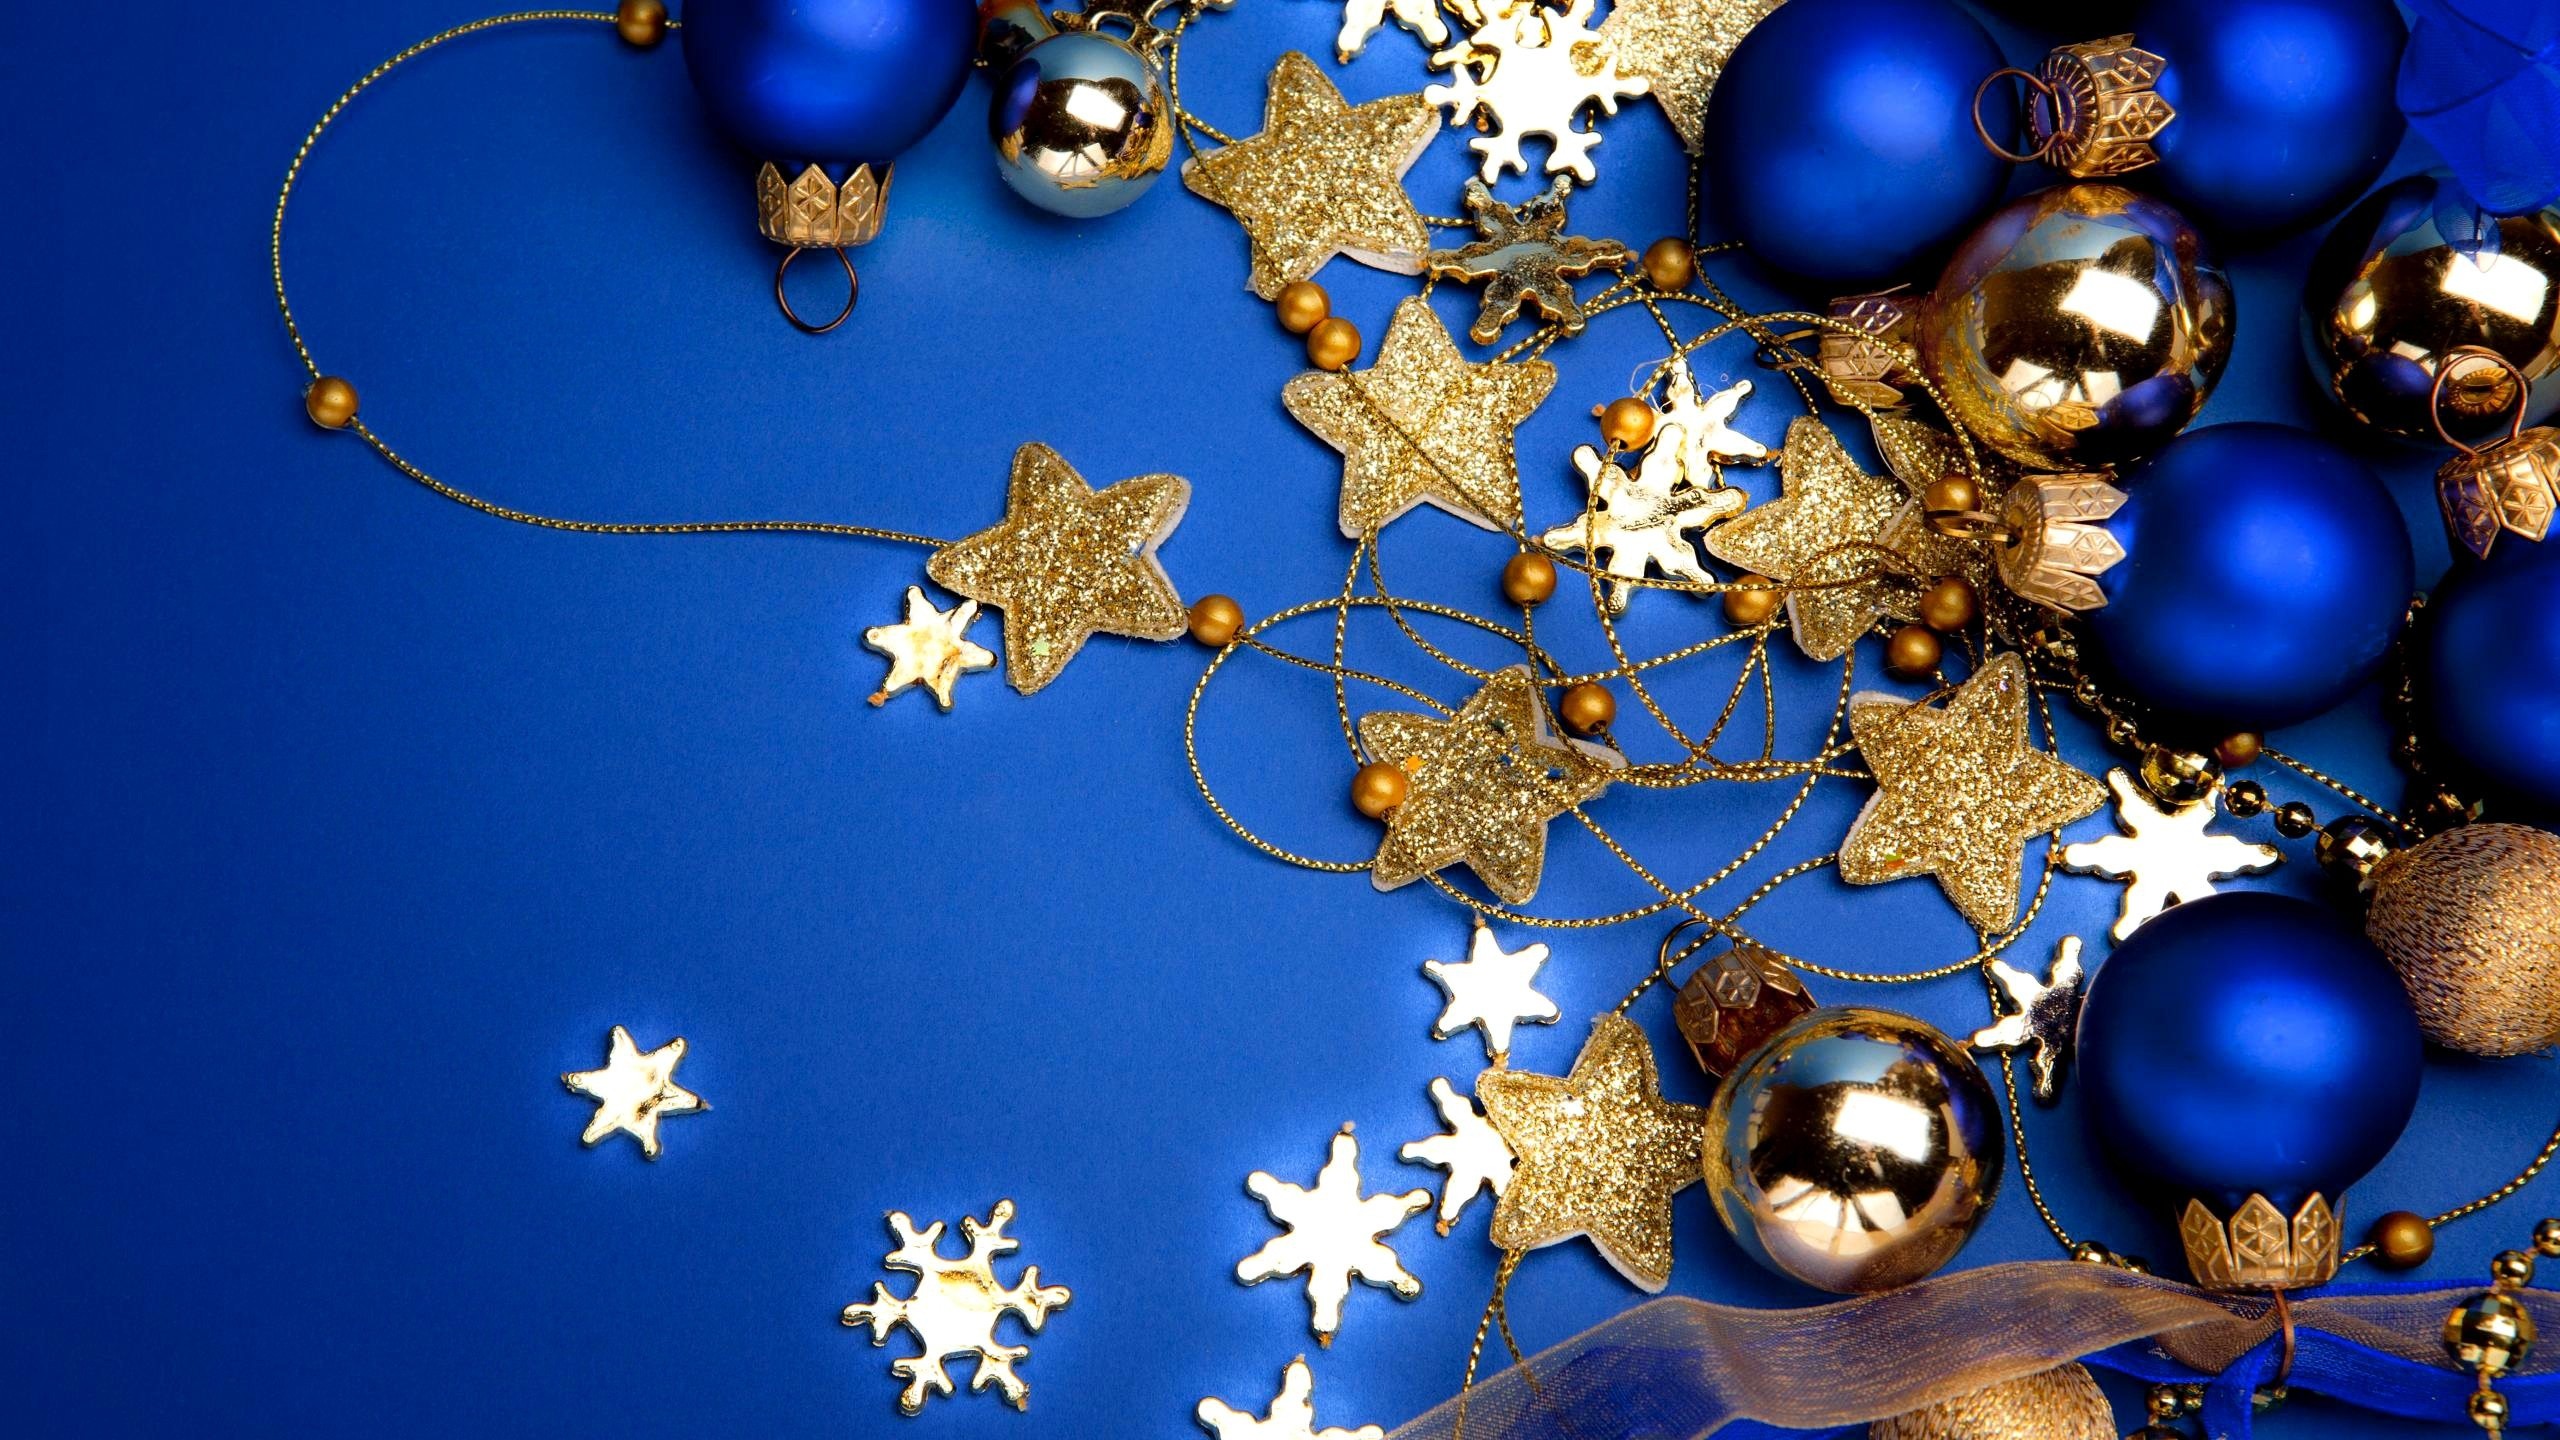 2560x1440 Christmas decorations - Google Search